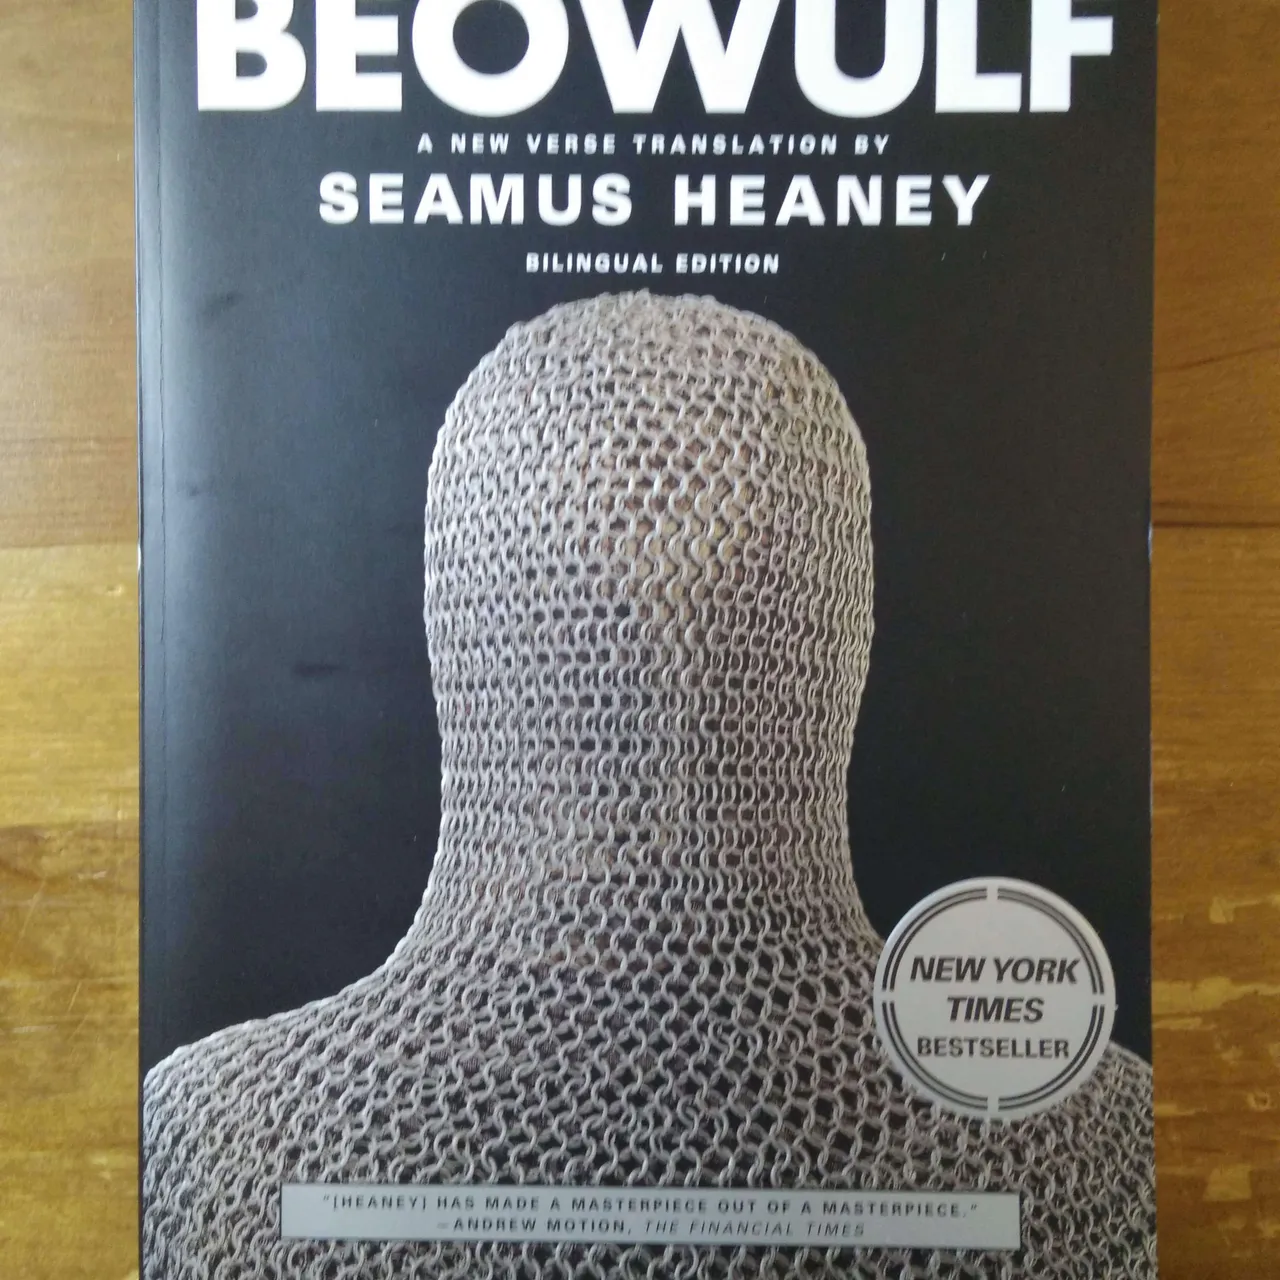 Beowulf by Seamus Heaney photo 1